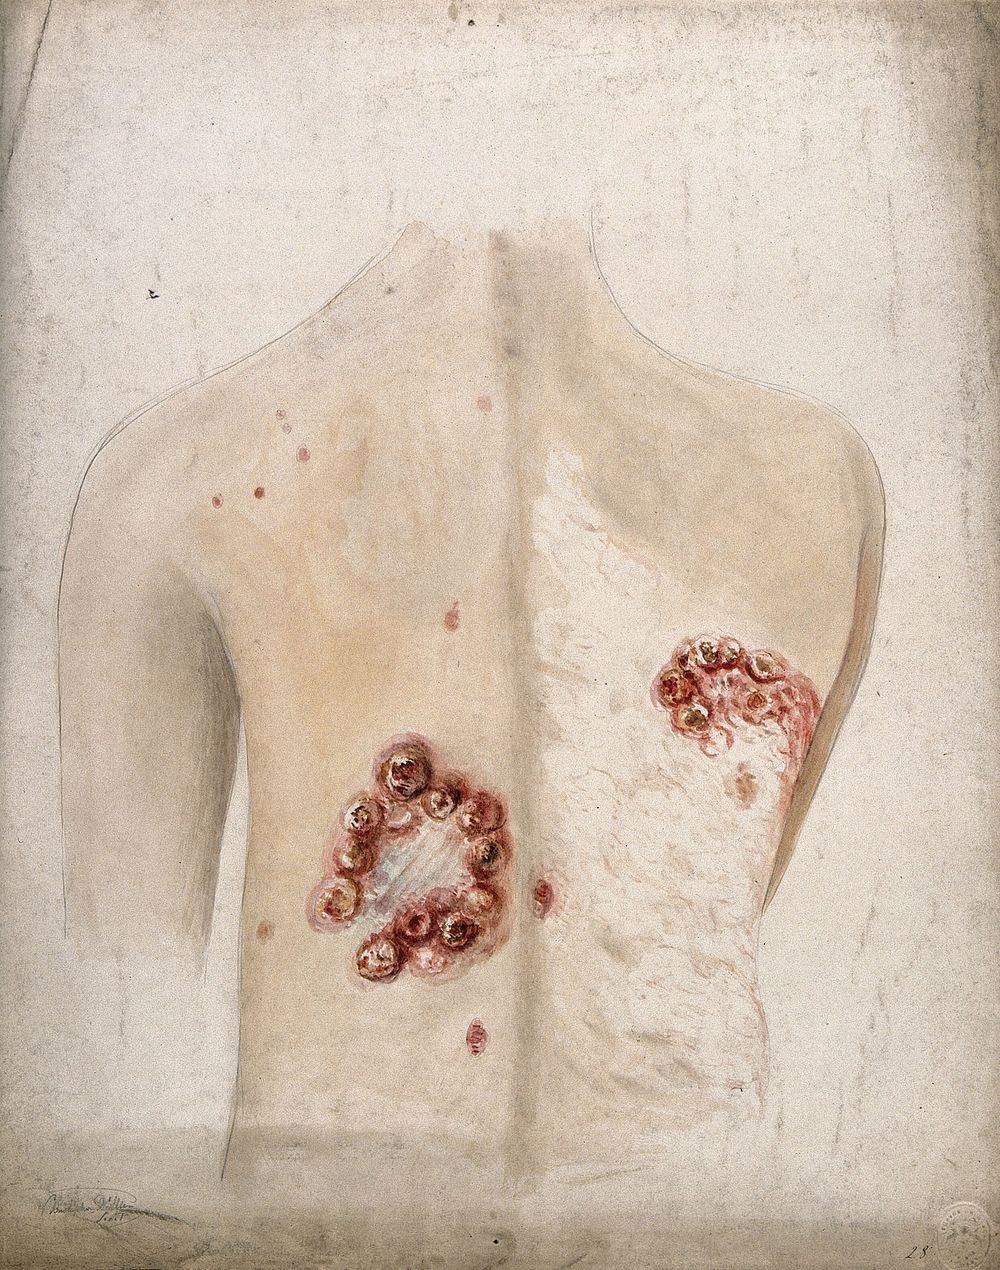 Clusters of abcesses or sores on the back of a woman. Watercolour by C. D'Alton, 1857.